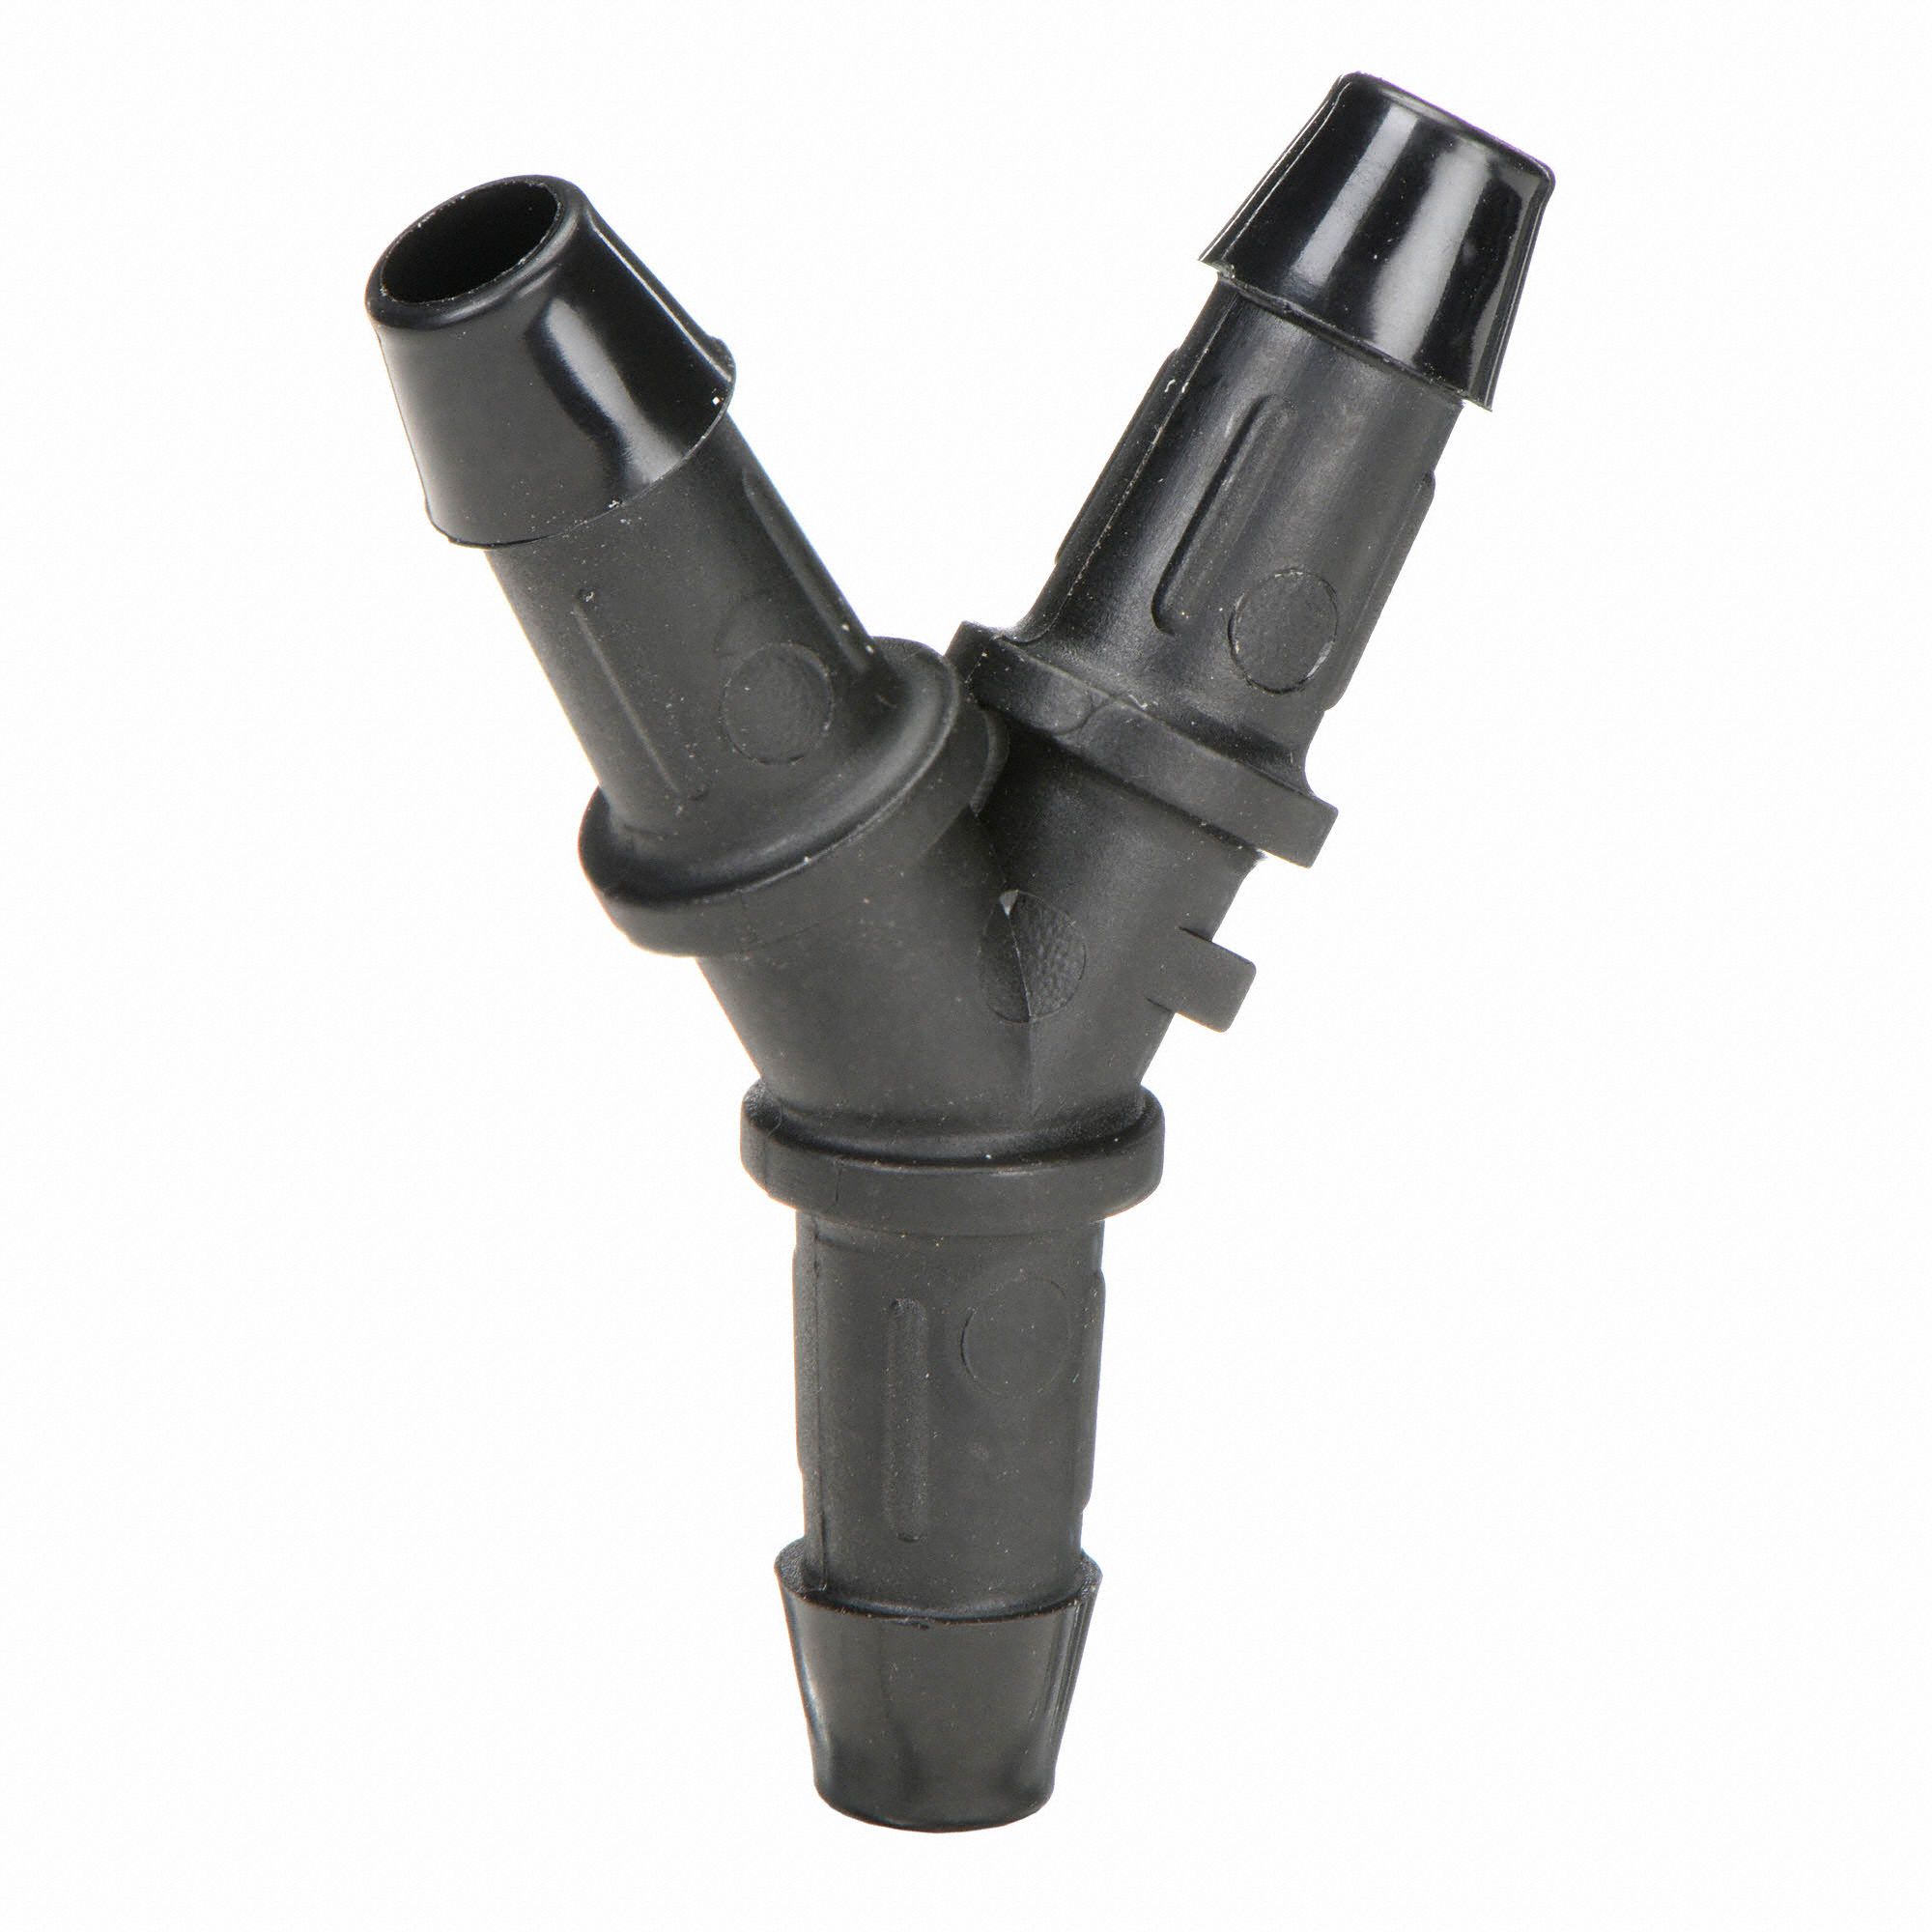 1/4" Wye Connector Tube-to-Tube Durable Nylon Extra-Grip Barbed Tube Fitting 